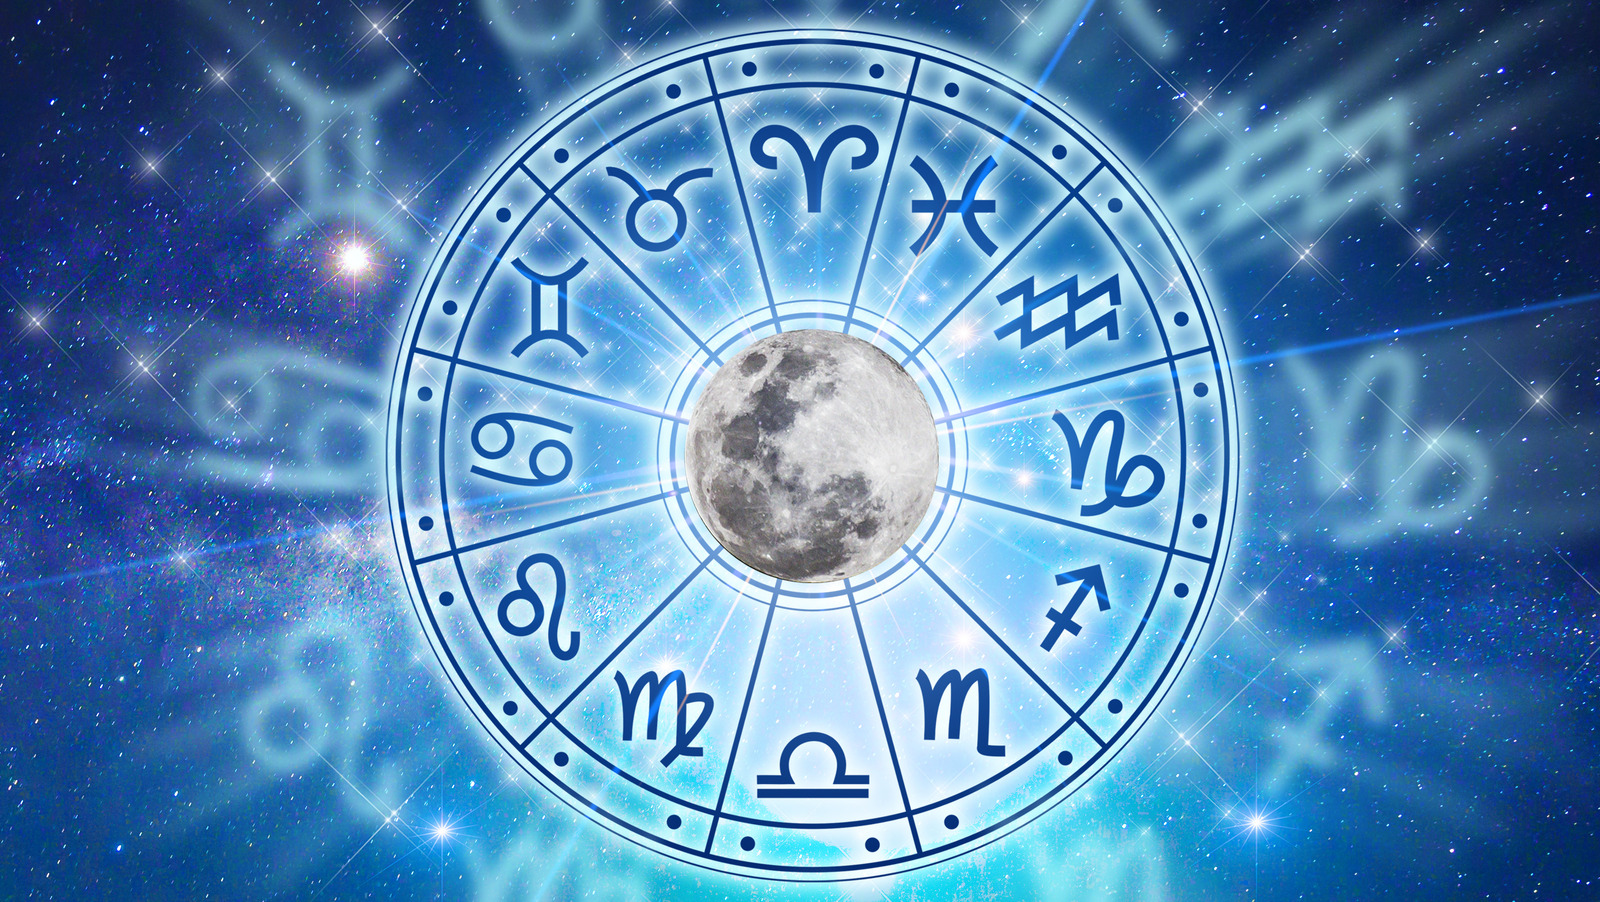 What is the moon for Scorpio?